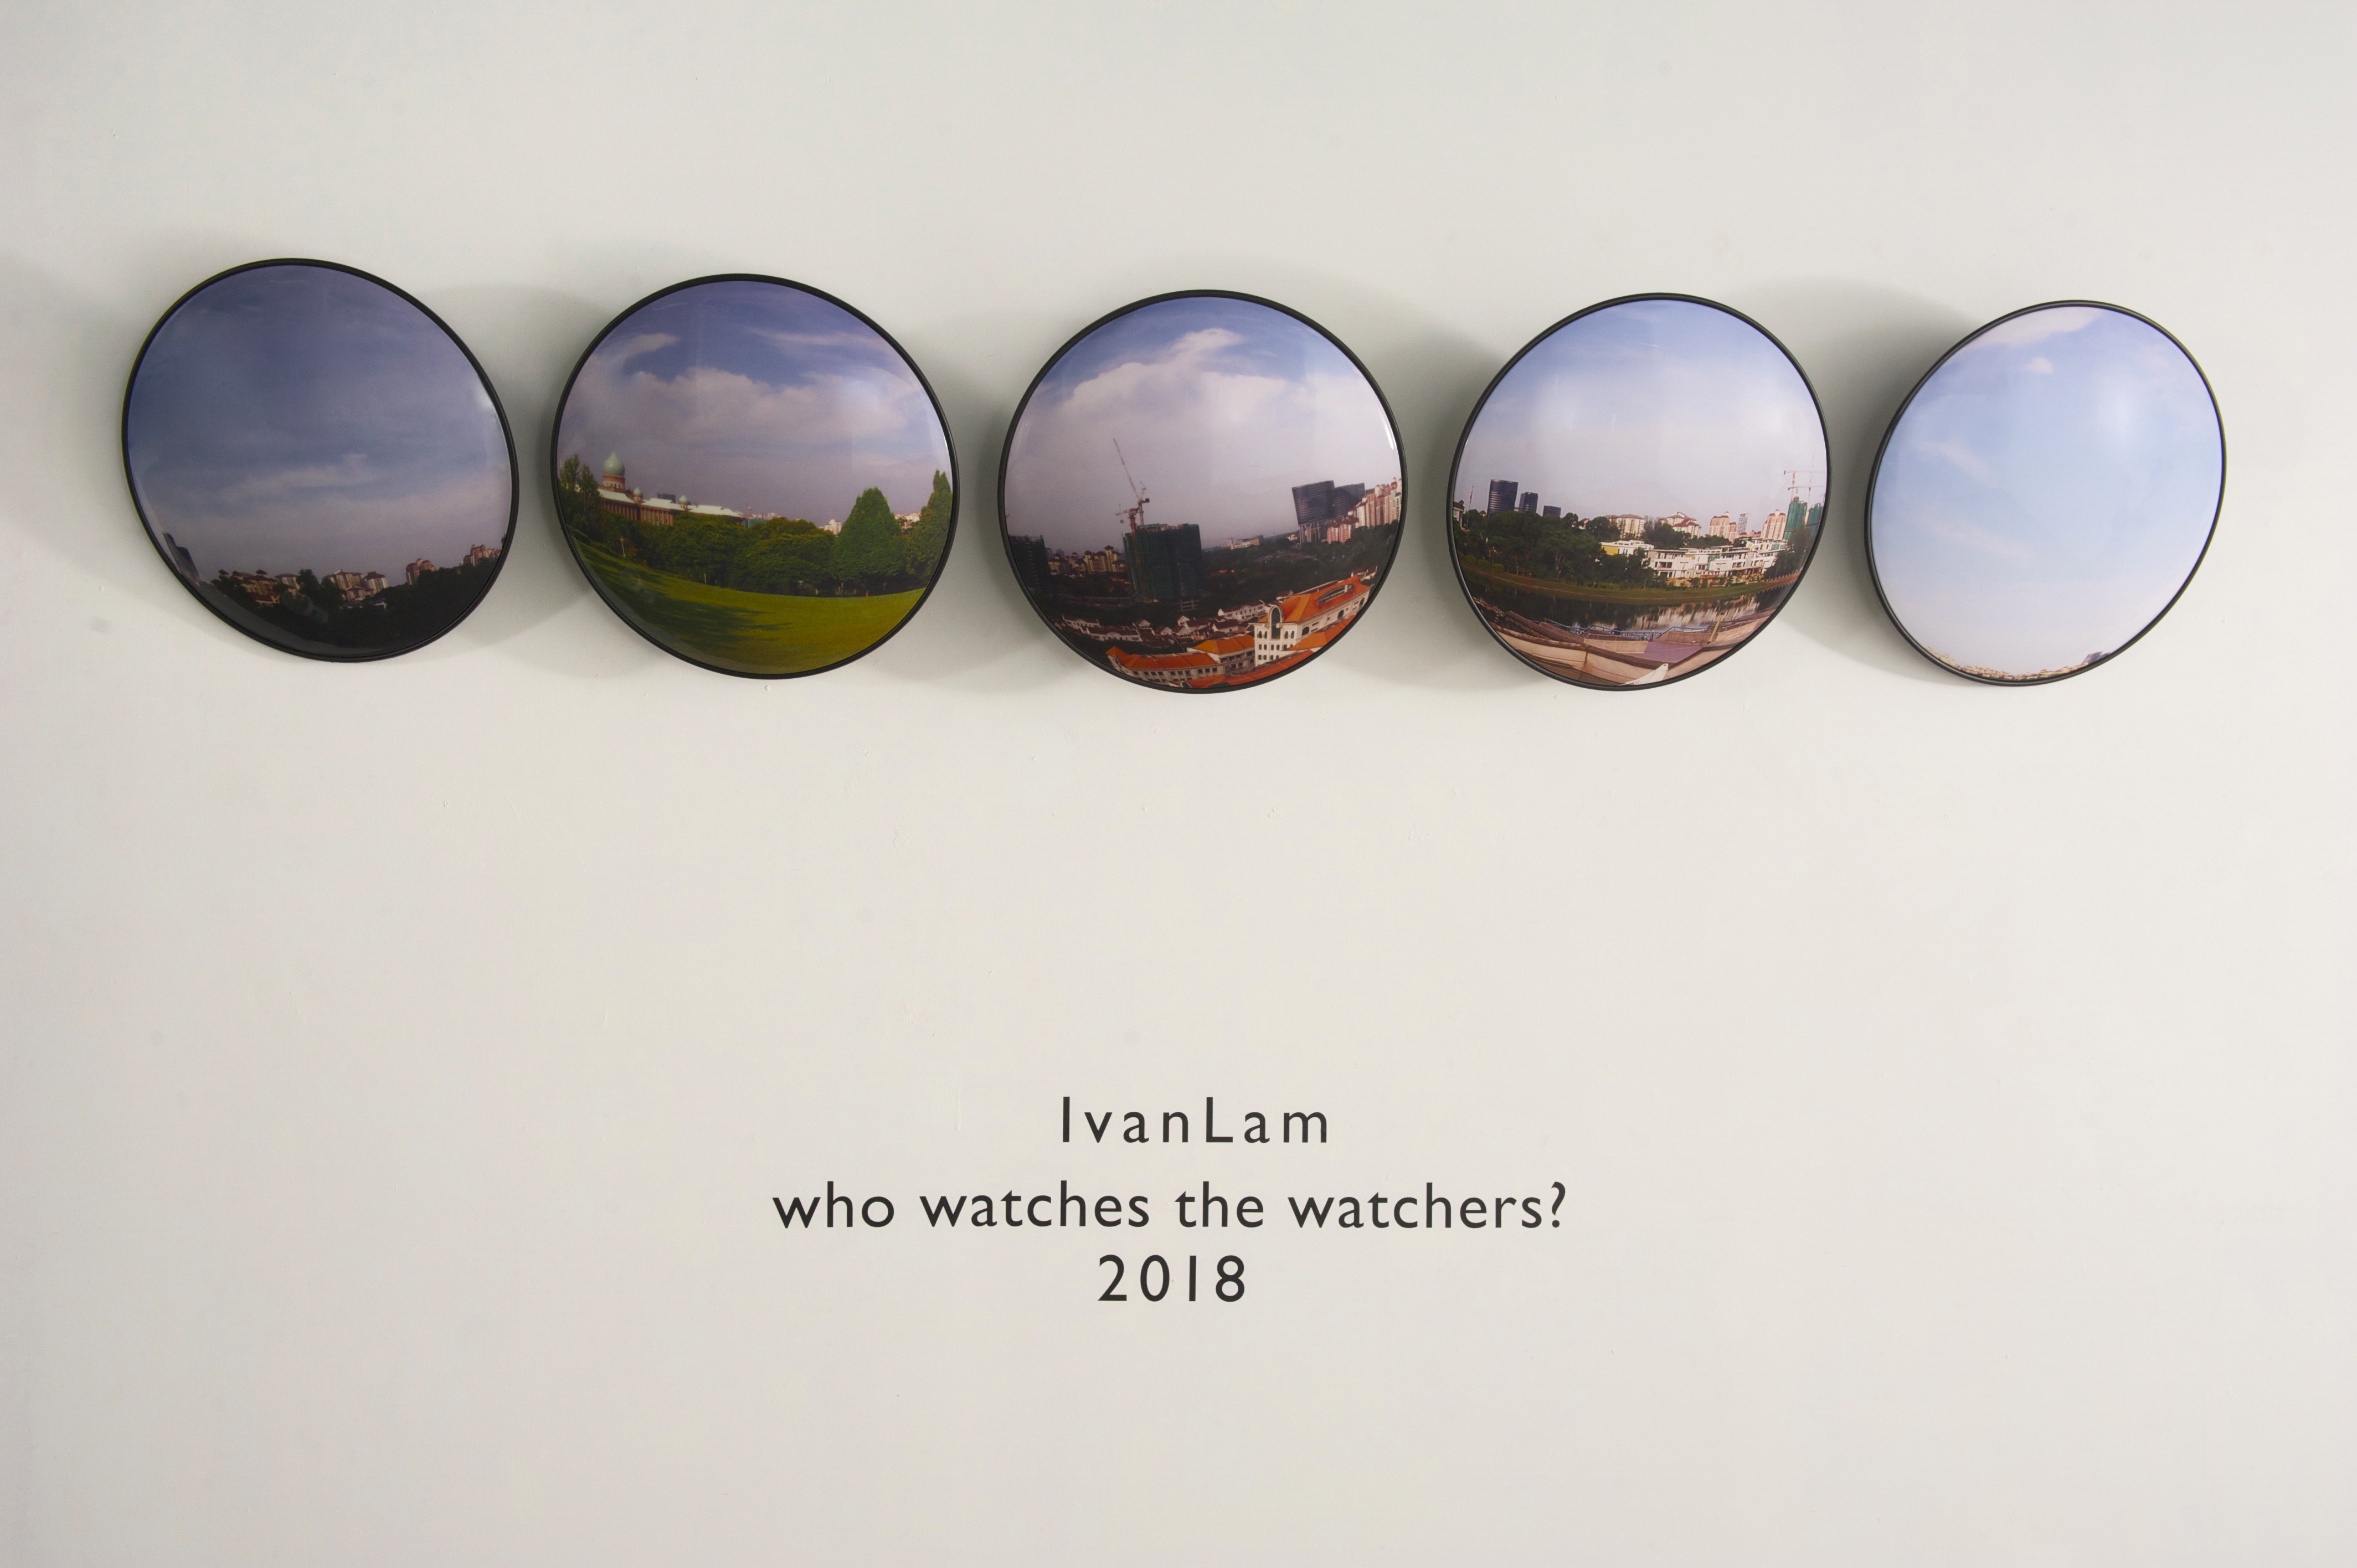 Ivan Lam - Who watches the watchers? (2018) | Inkjet print laminated on convex mirrors, plastic adapters and metal brackets; 60cm diameter per mirror, 304cm in length